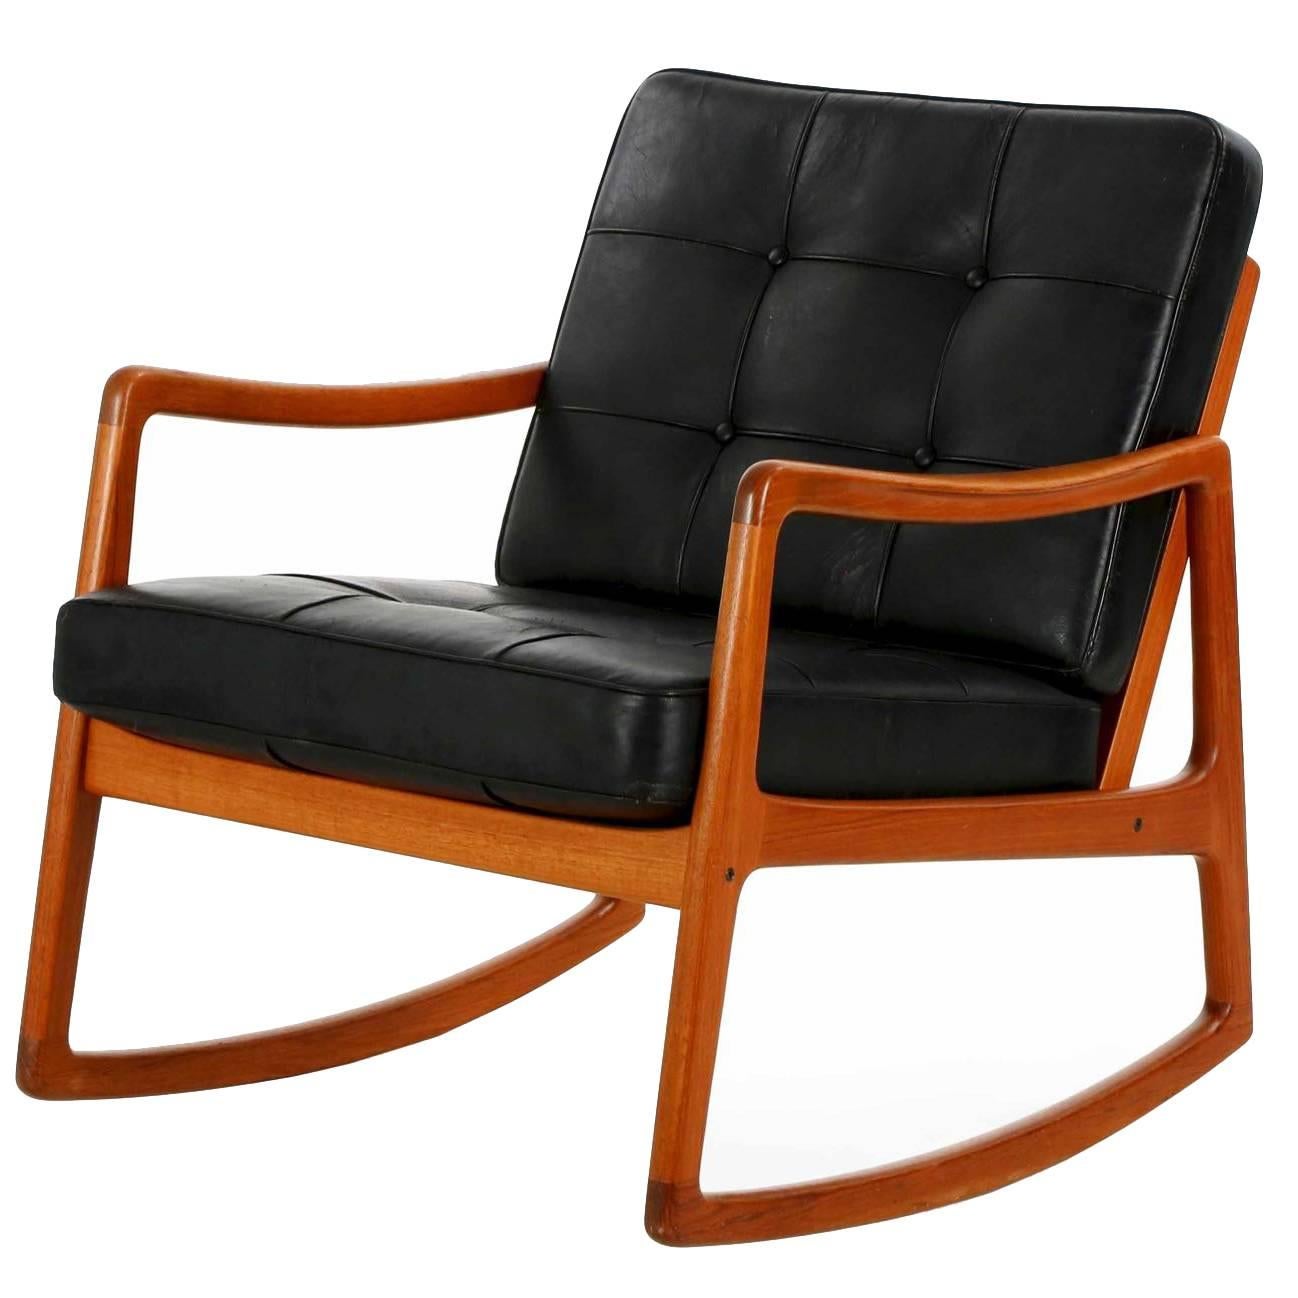 Danish Modern Sculpted Teak and Leather Rocking Chair by Ole Wanscher